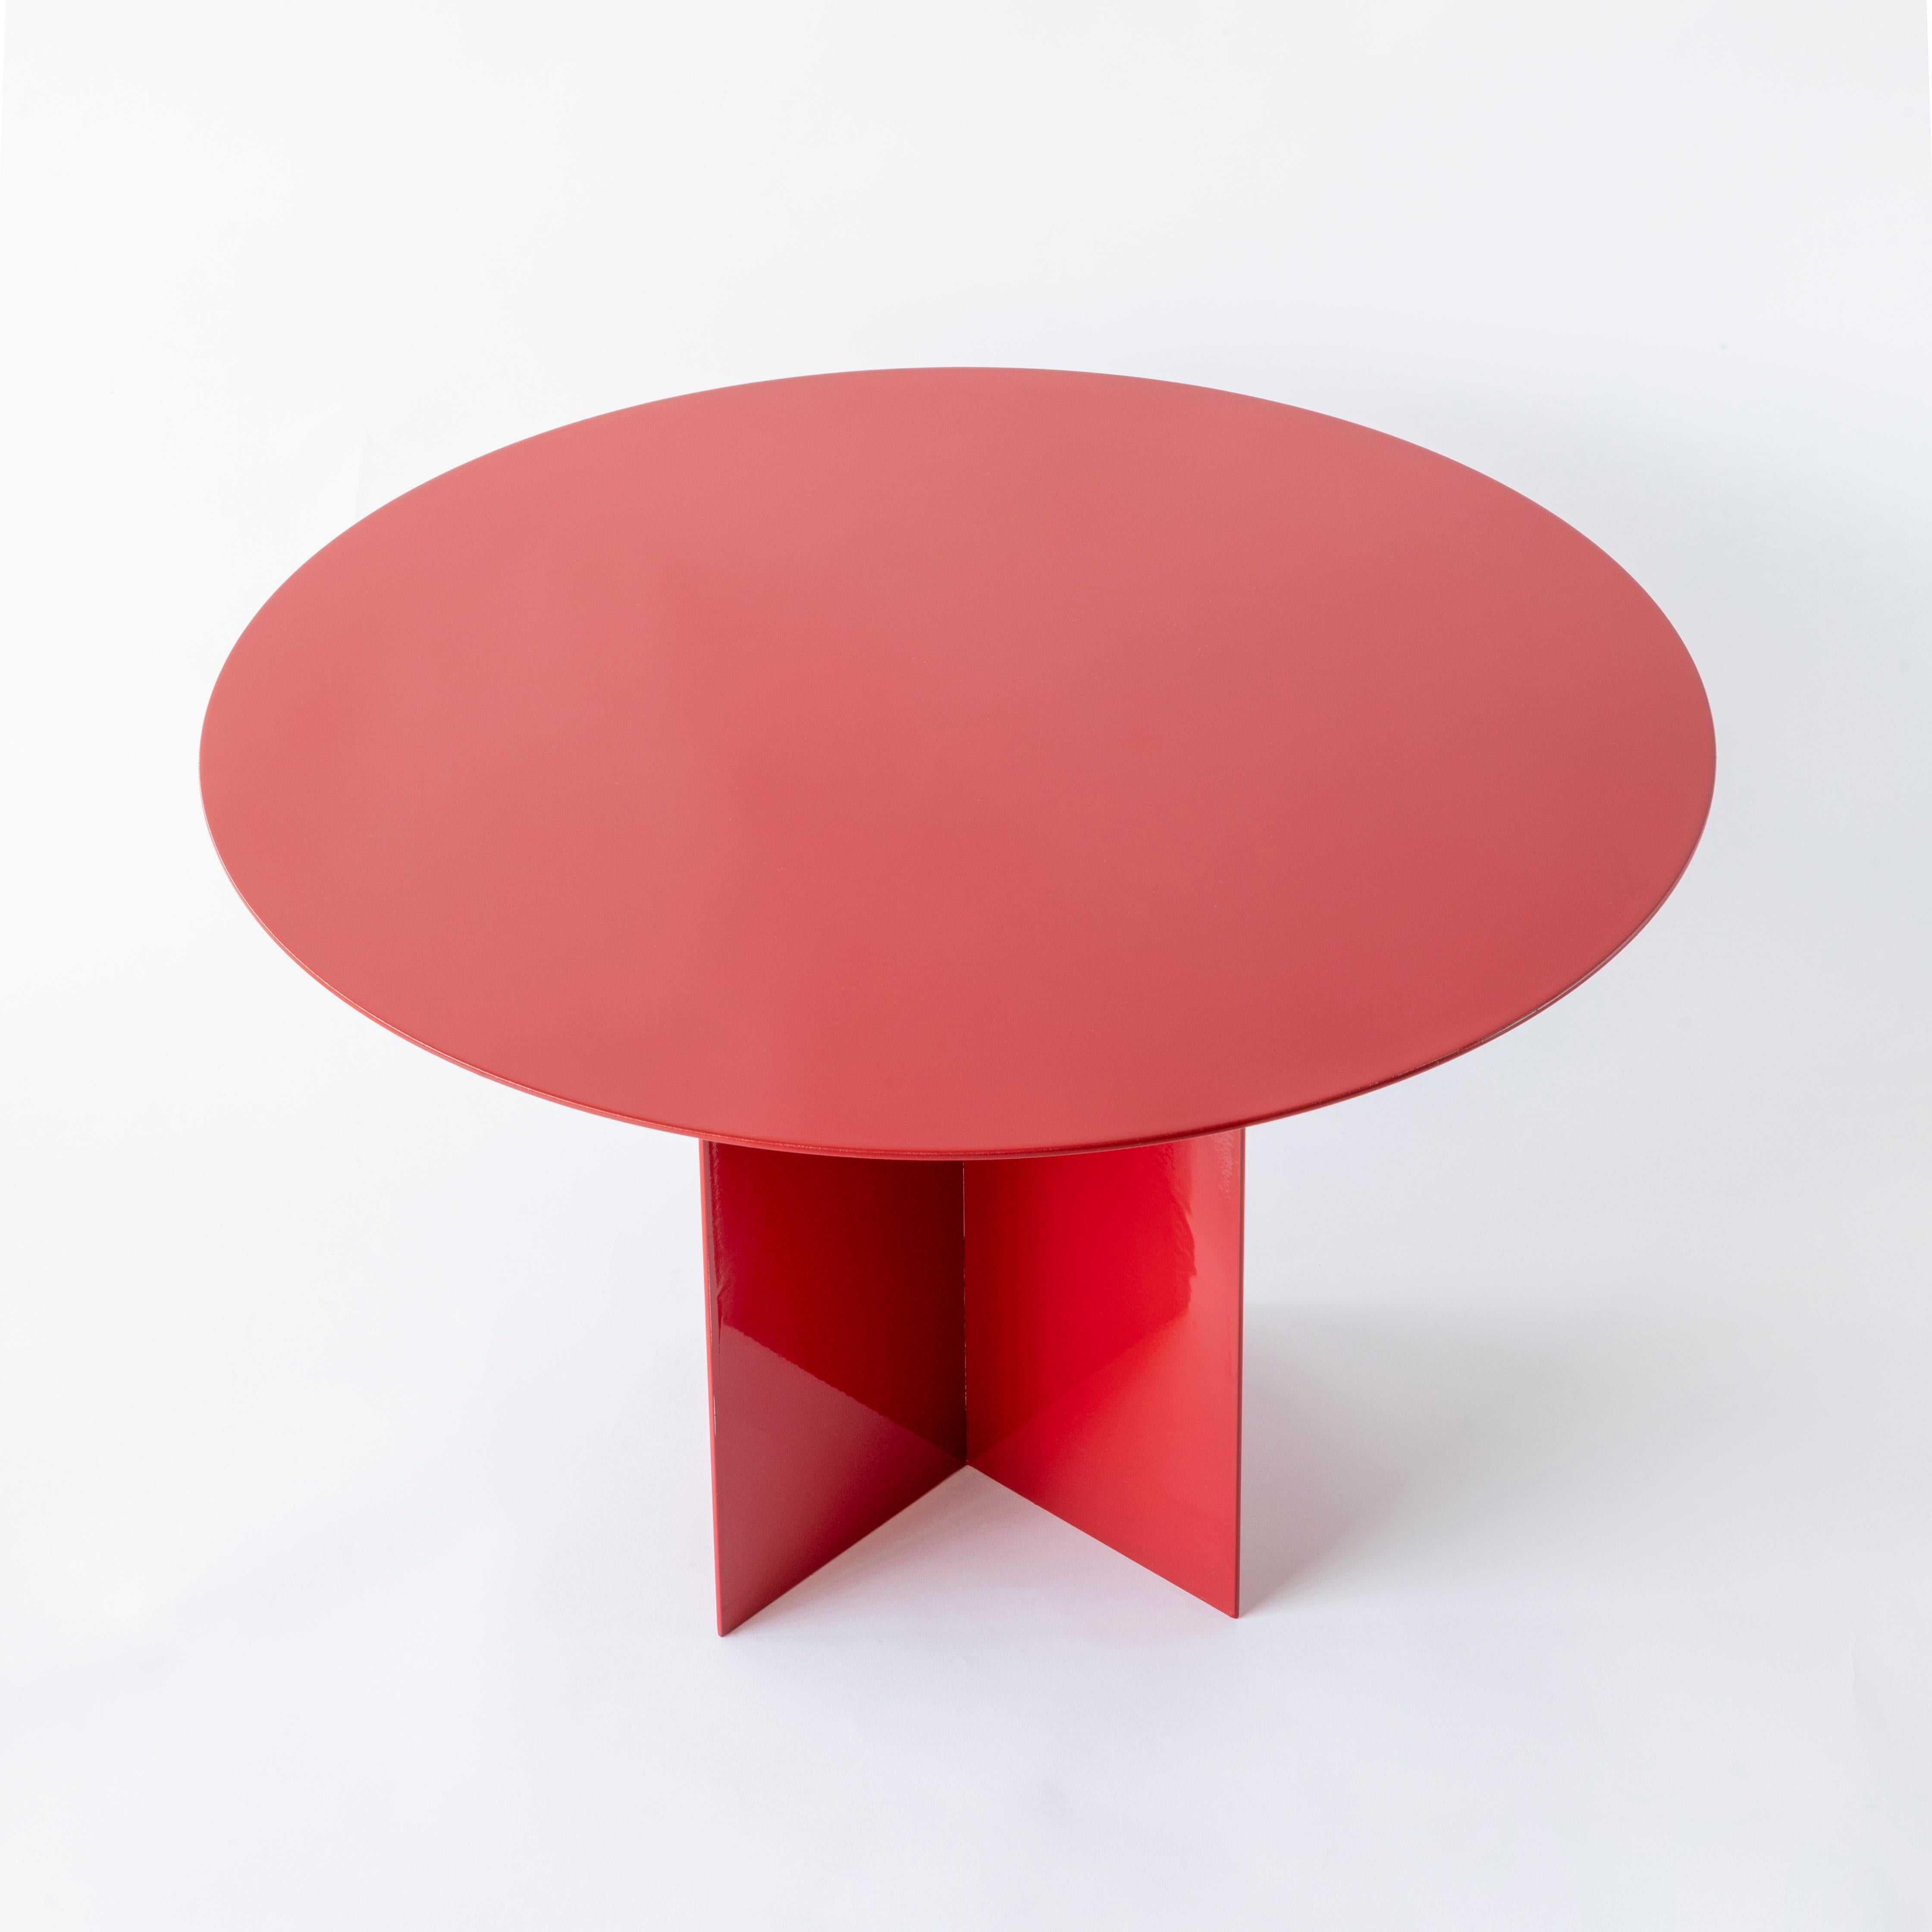 An iron origami that seems light, a game of cross shaped forms and surfaces of any geometric shape define this collection of tables, characterized by a feature common to all my protects: colour.
The cross shaped base fits any shape of top, all